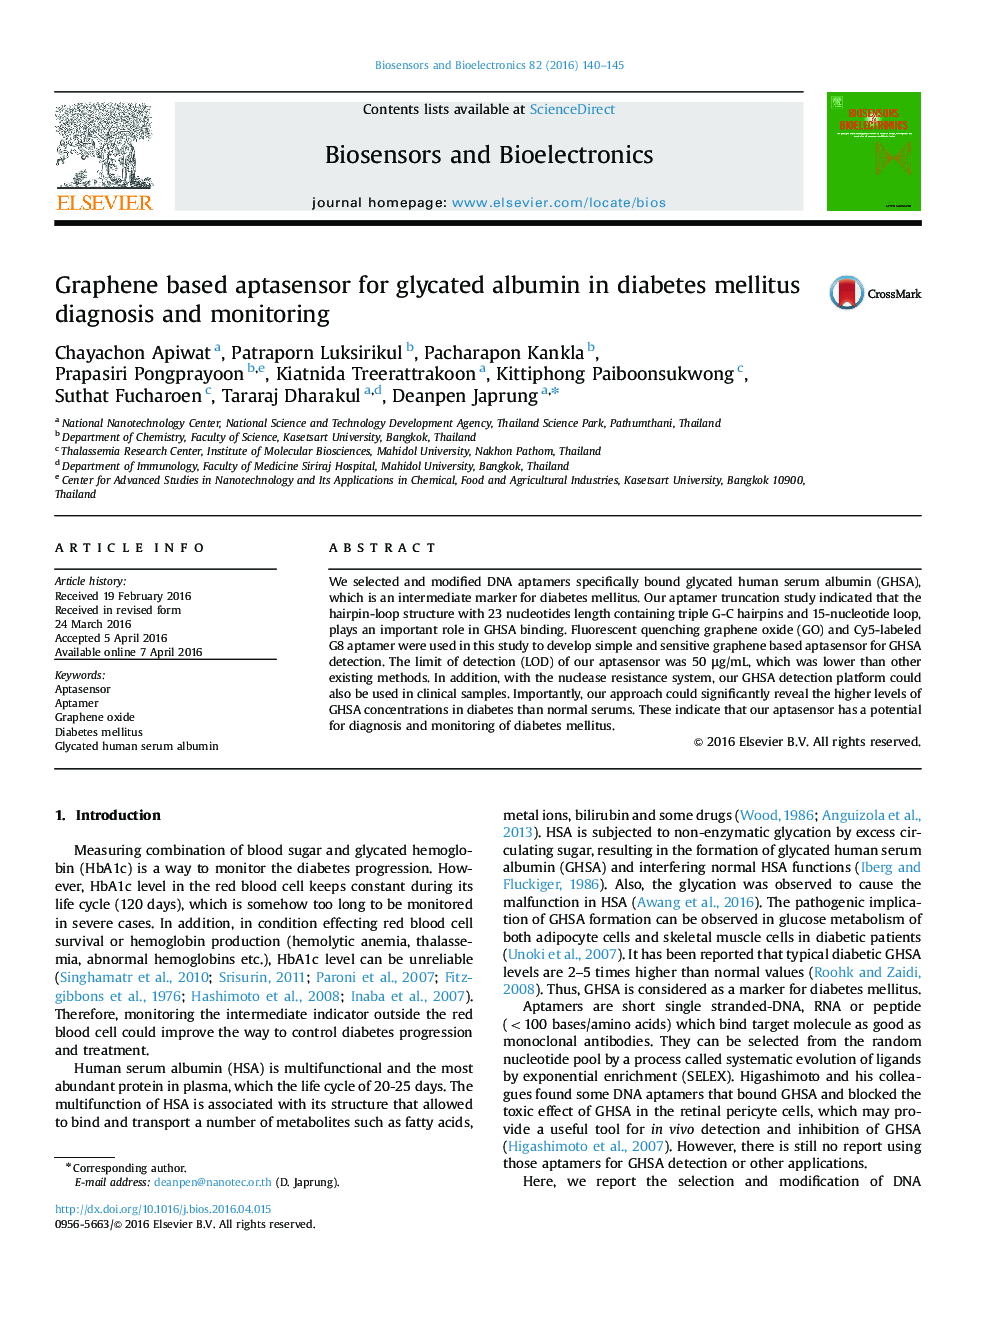 Graphene based aptasensor for glycated albumin in diabetes mellitus diagnosis and monitoring